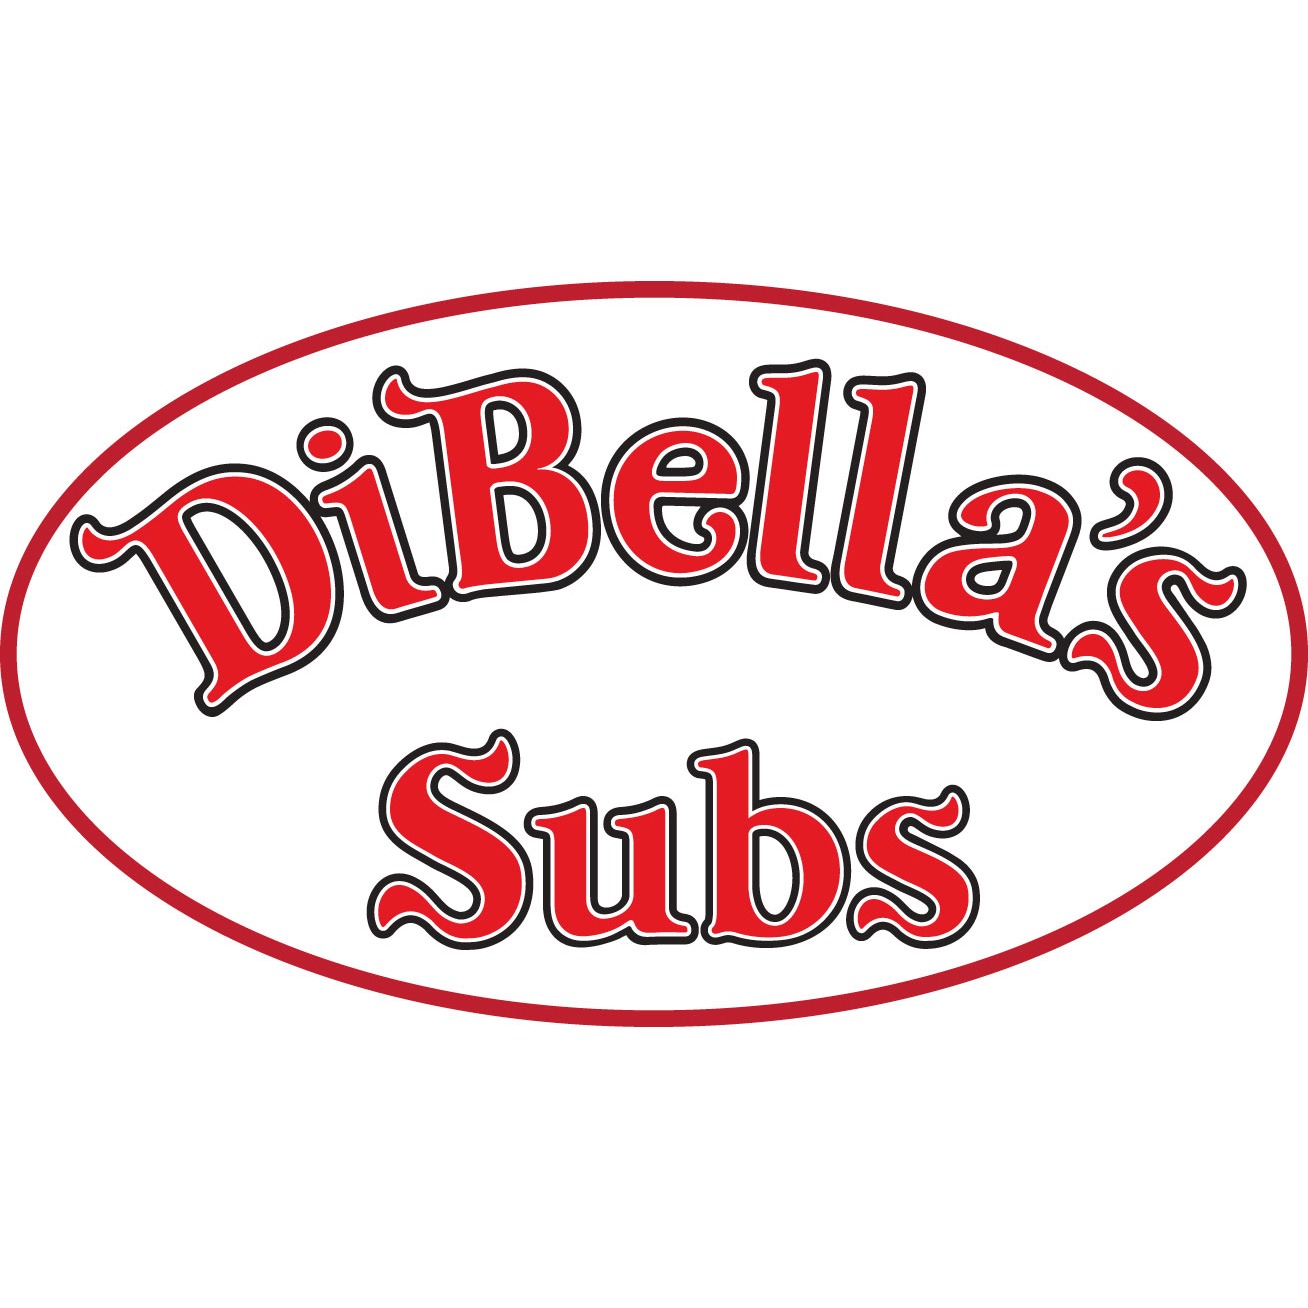 DiBella's Subs - Youngstown, OH 44512 - (330)729-9670 | ShowMeLocal.com